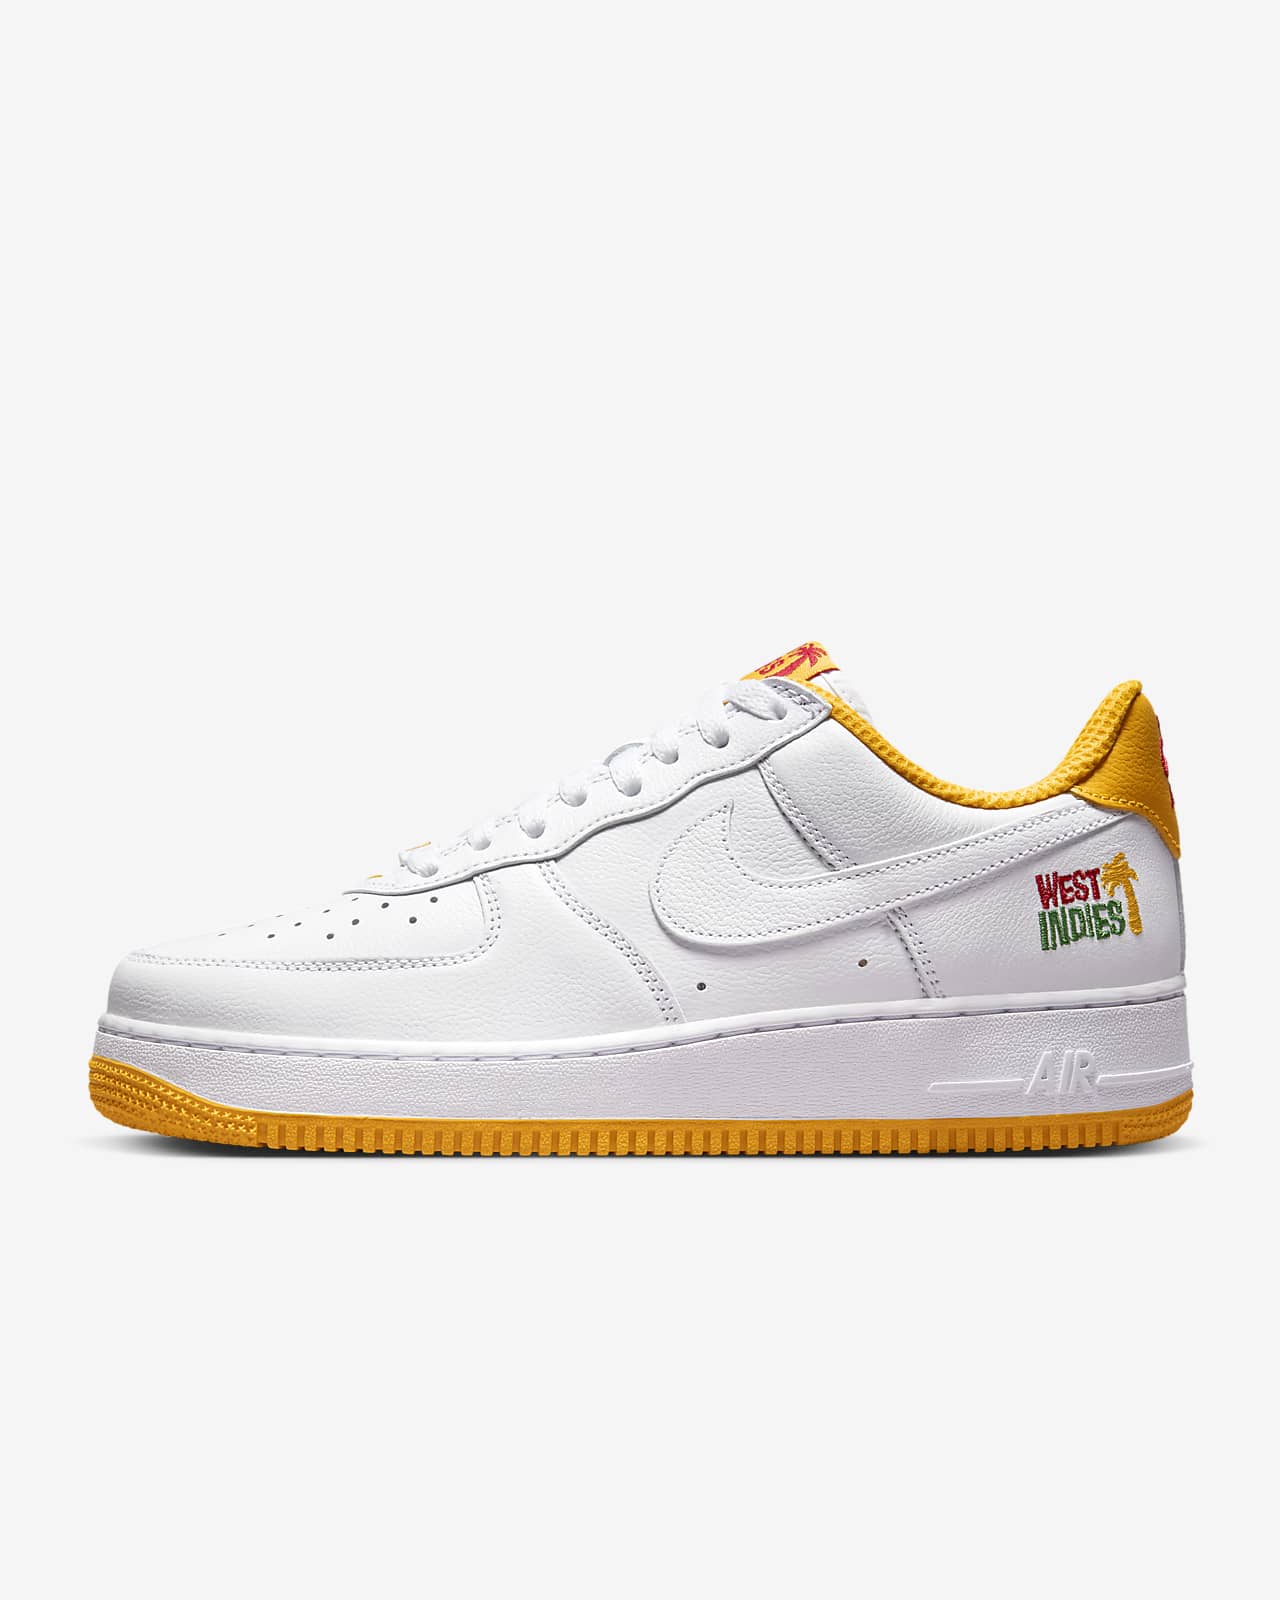 Nike Air Force 1 Low Retro QS Mens Shoes Review